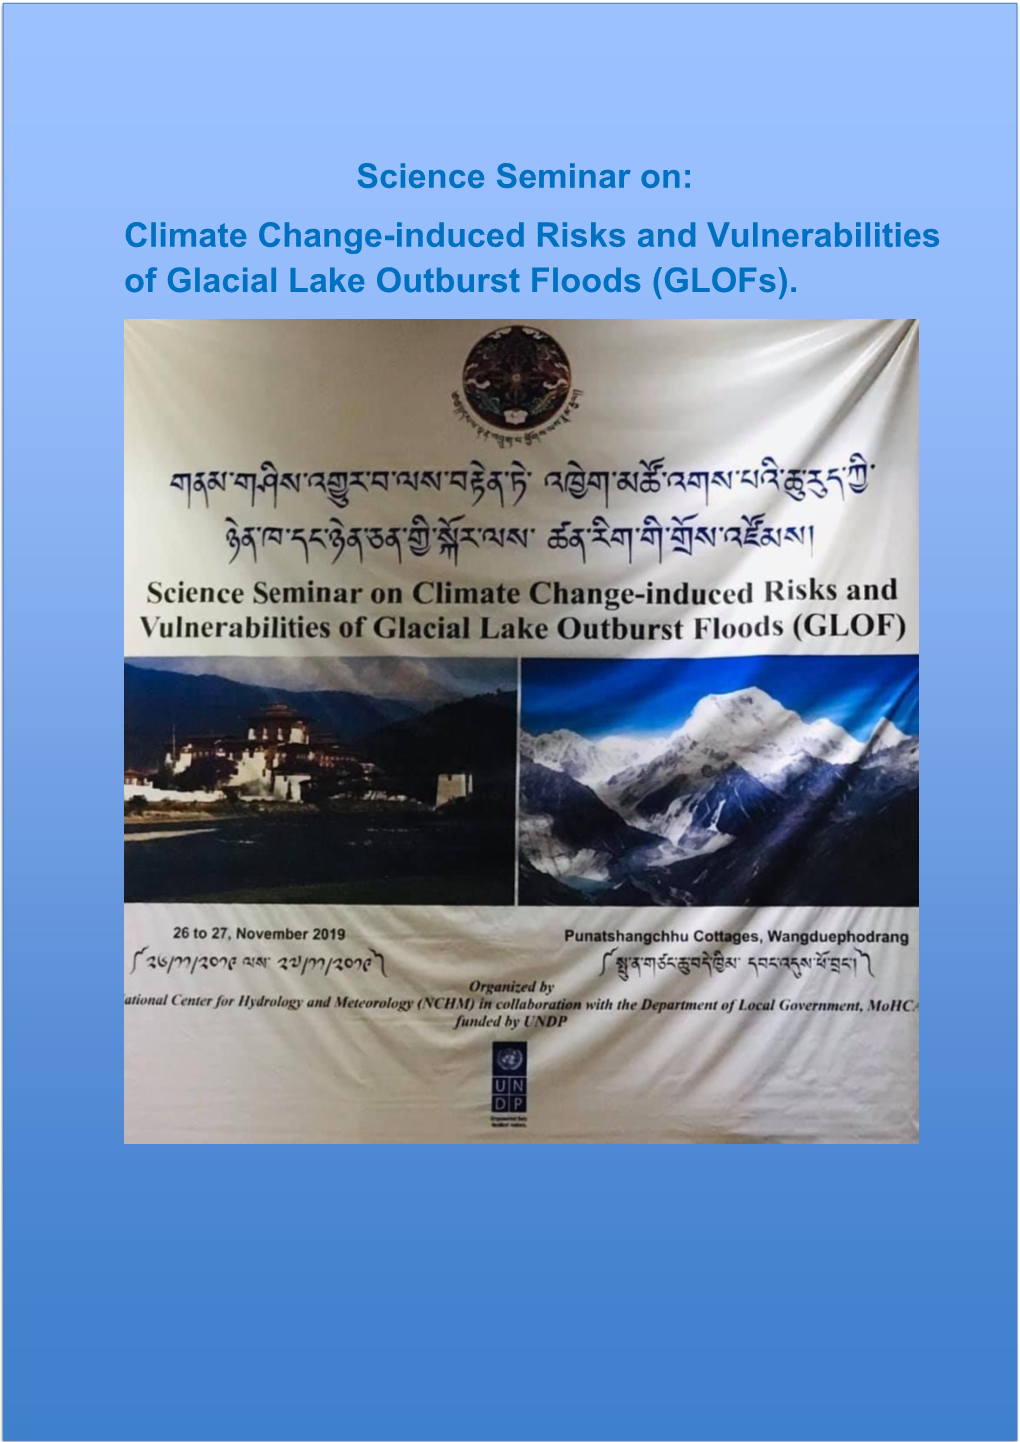 Science Seminar On: Climate Change-Induced Risks and Vulnerabilities of Glacial Lake Outburst Floods (Glofs)